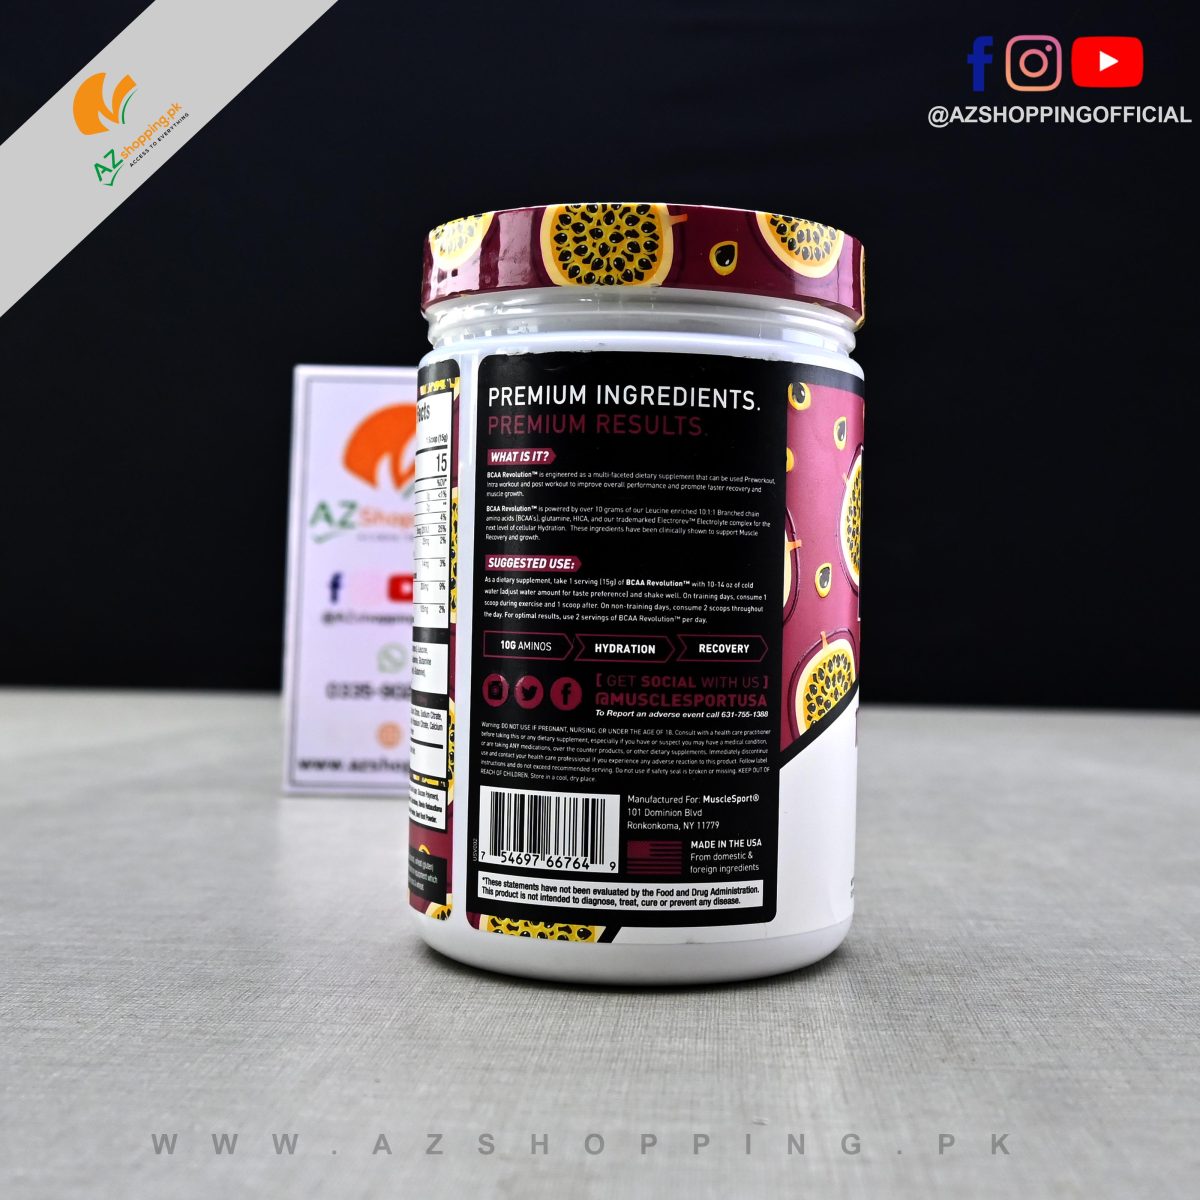 Musclesport – BCAA NRG Revolution – Pre-workout/Intra-Workout/Post-Workout – 30 Servings